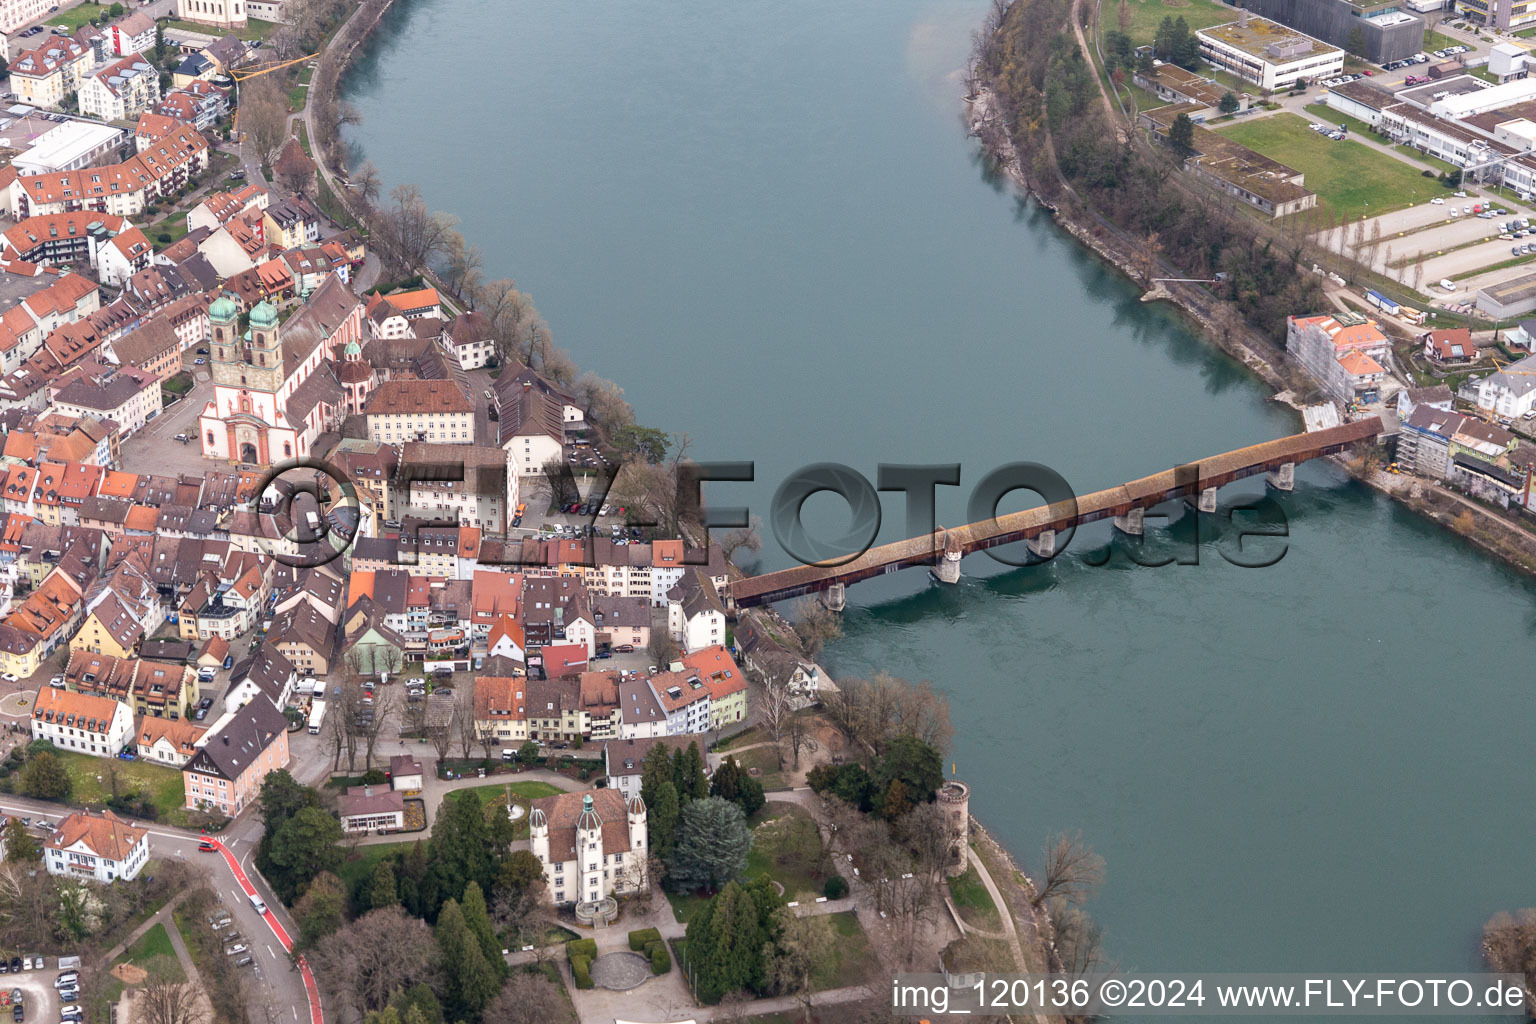 City center with old town and Castle Schoenau and the historic bridge to Switzerland crossing the river Rhine in Bad Saeckingen in the state Baden-Wurttemberg, Germany